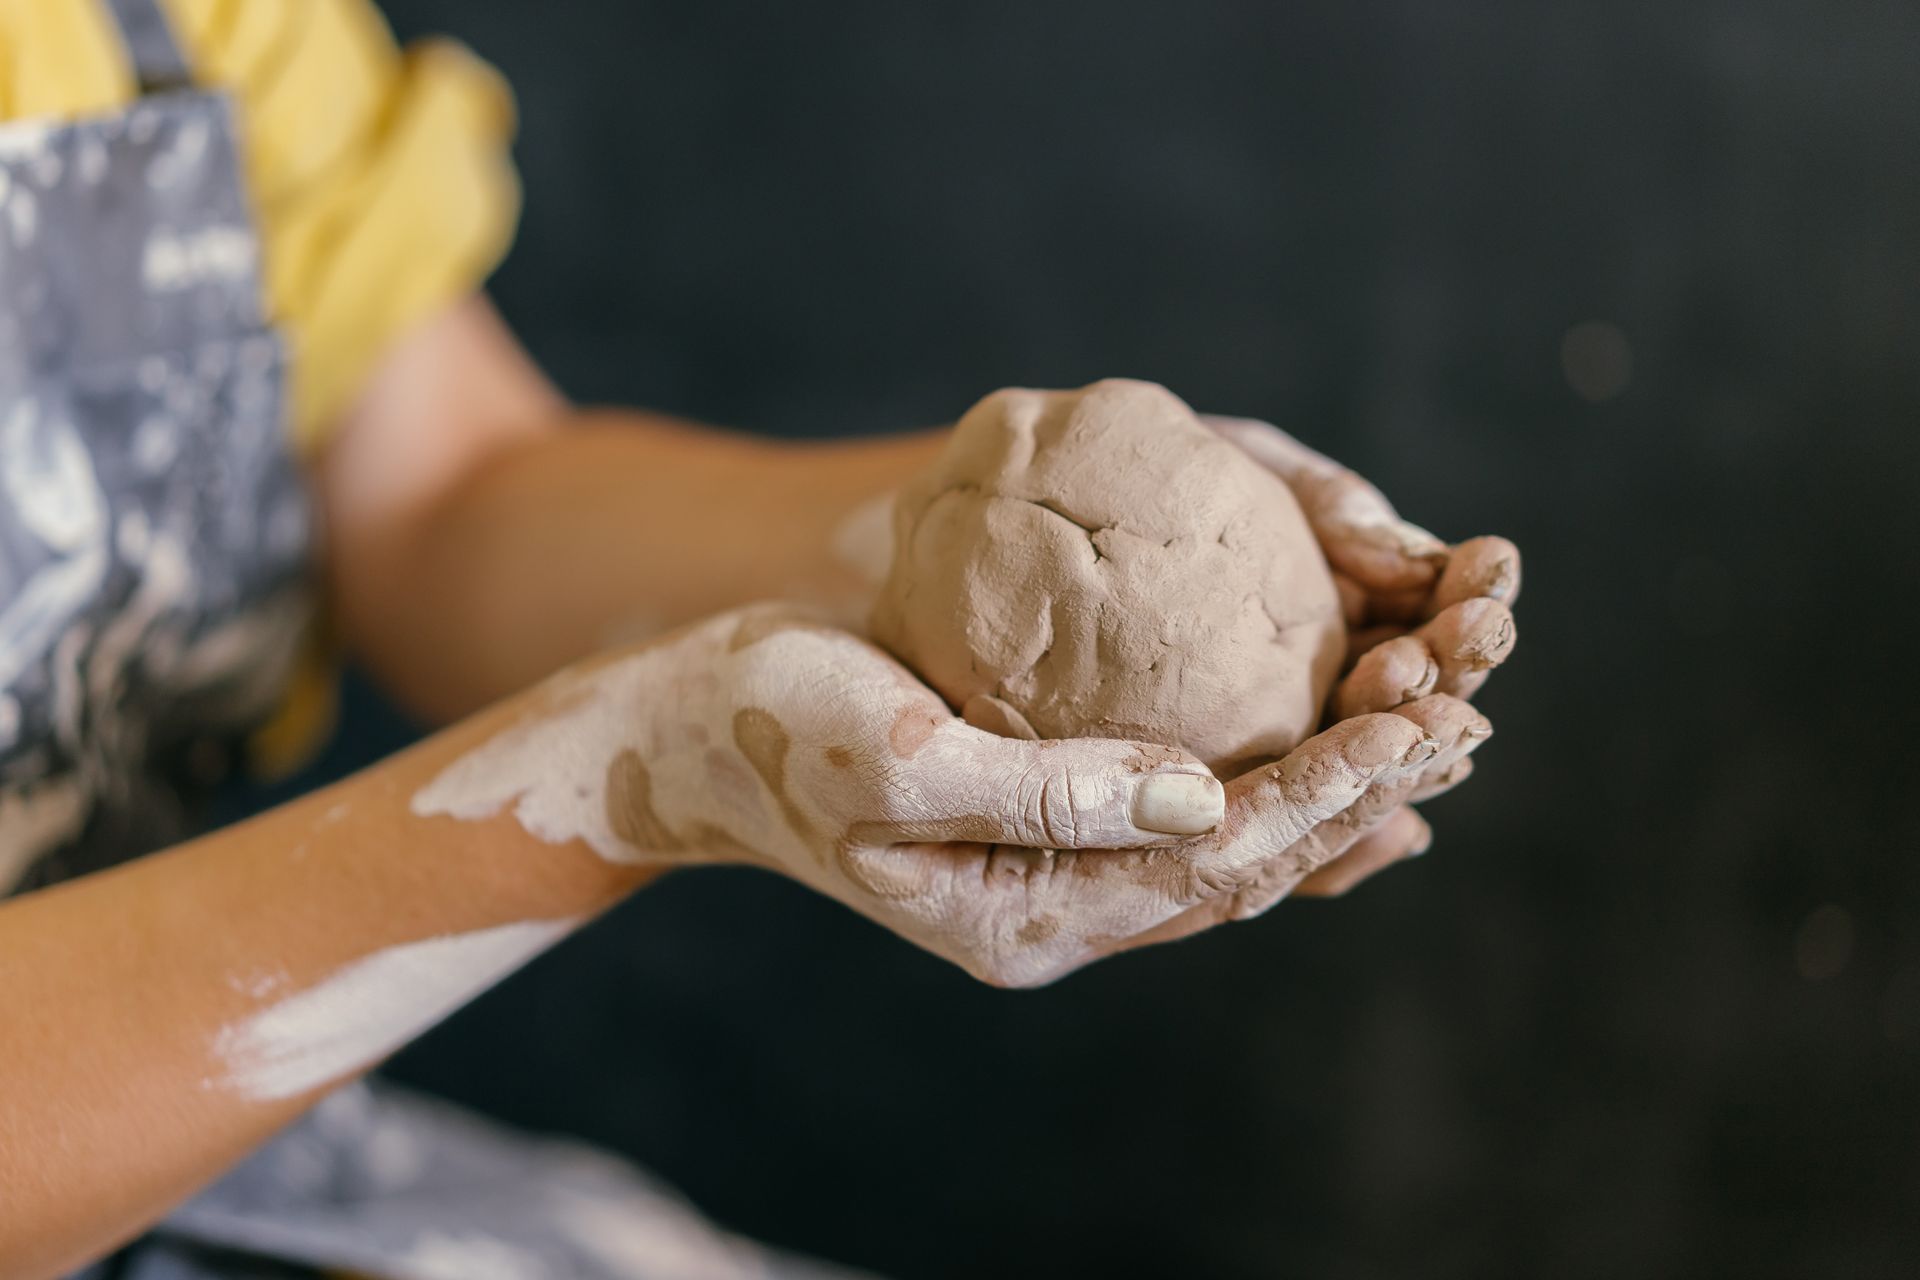 Artist's hands holding a lump of clay ready to be sculpted.